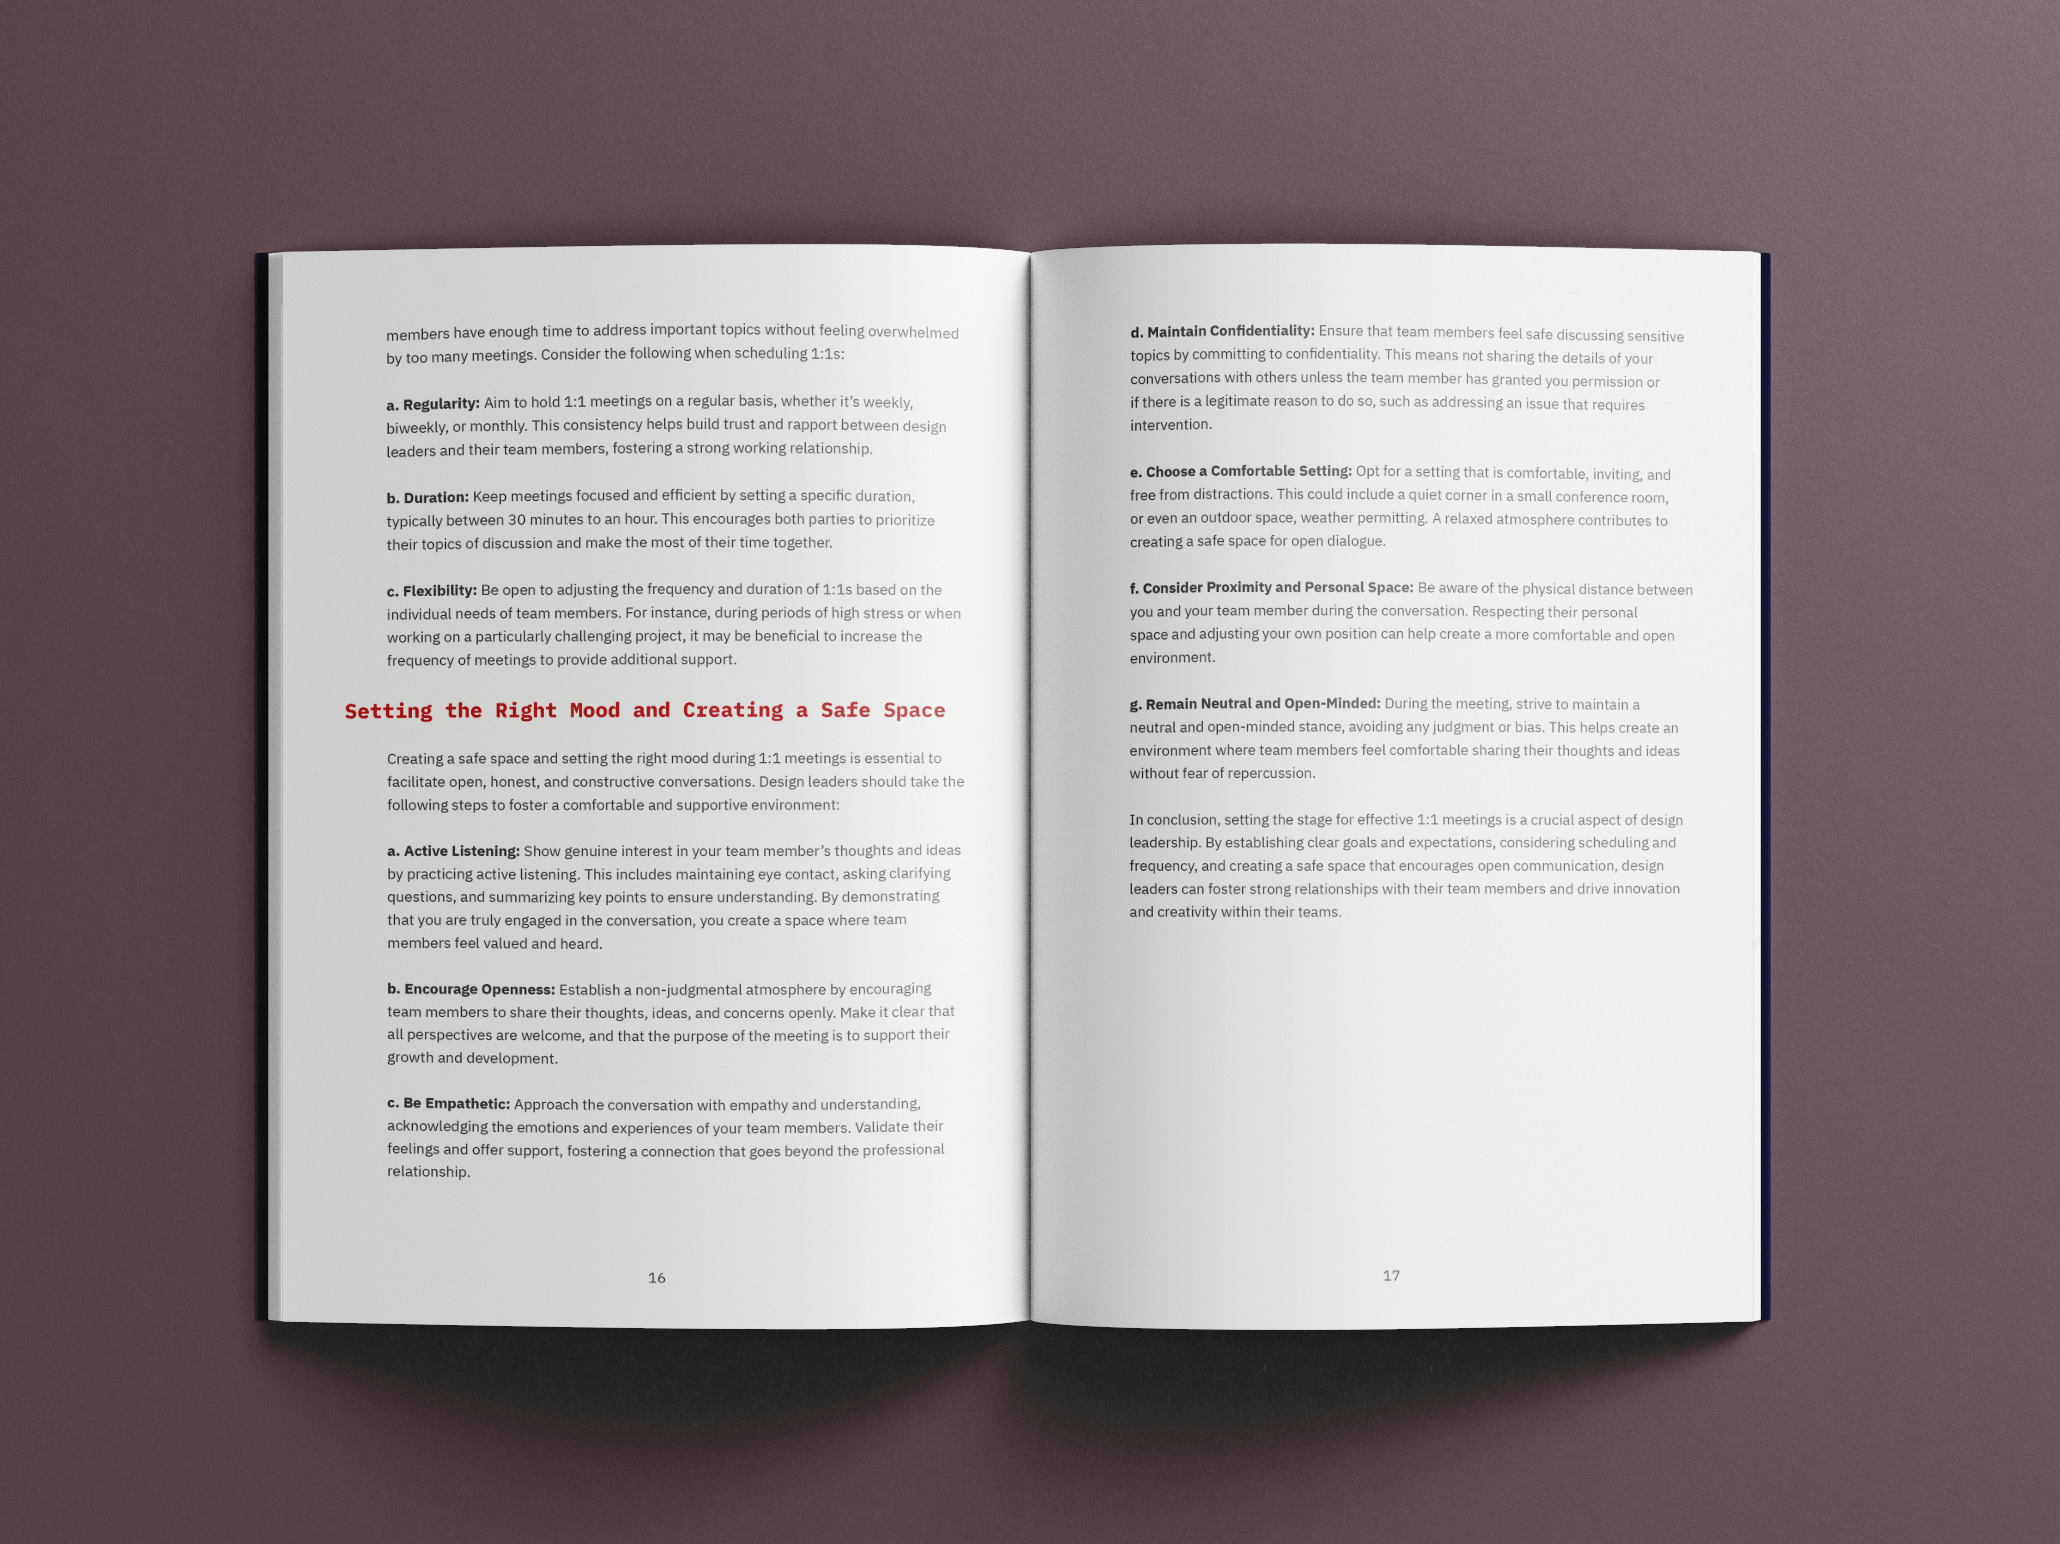 Two-page spread of an open book with text discussing scheduling and frequency considerations for 1:1 meetings, and tips for creating a safe space and setting the right mood.